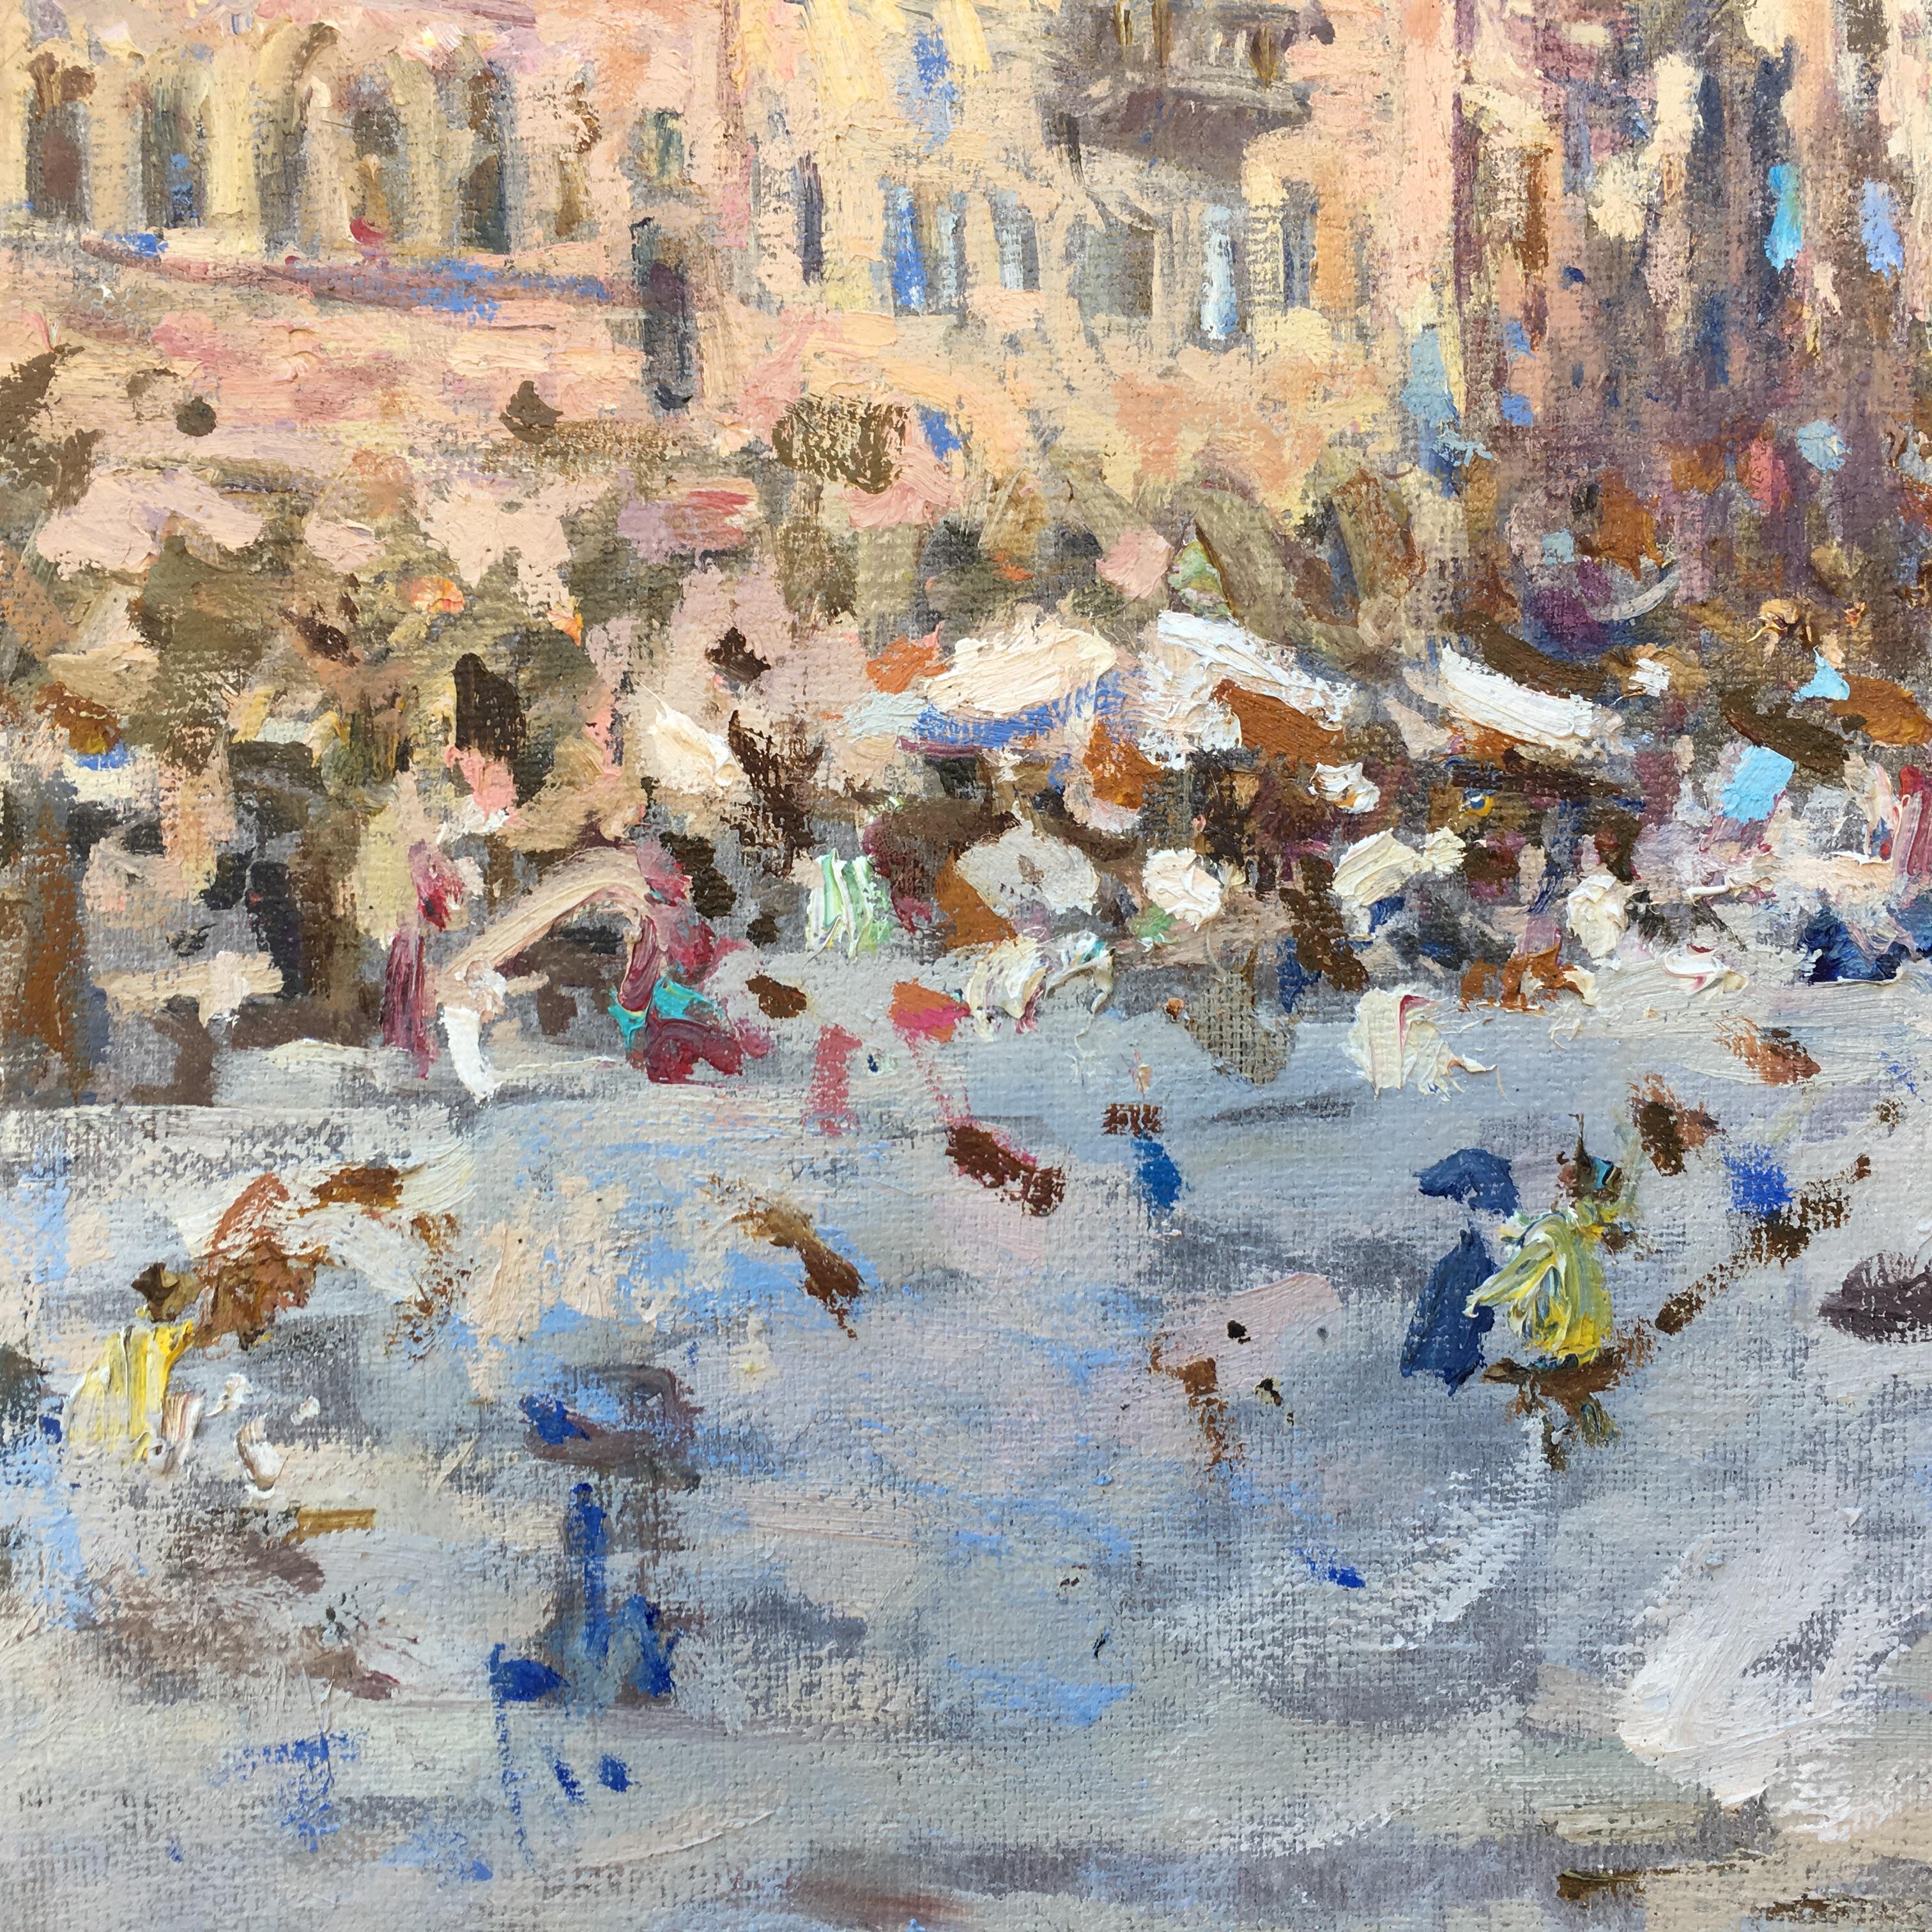 Piazza in Firenze - Painting by Valeria Lakrisenko